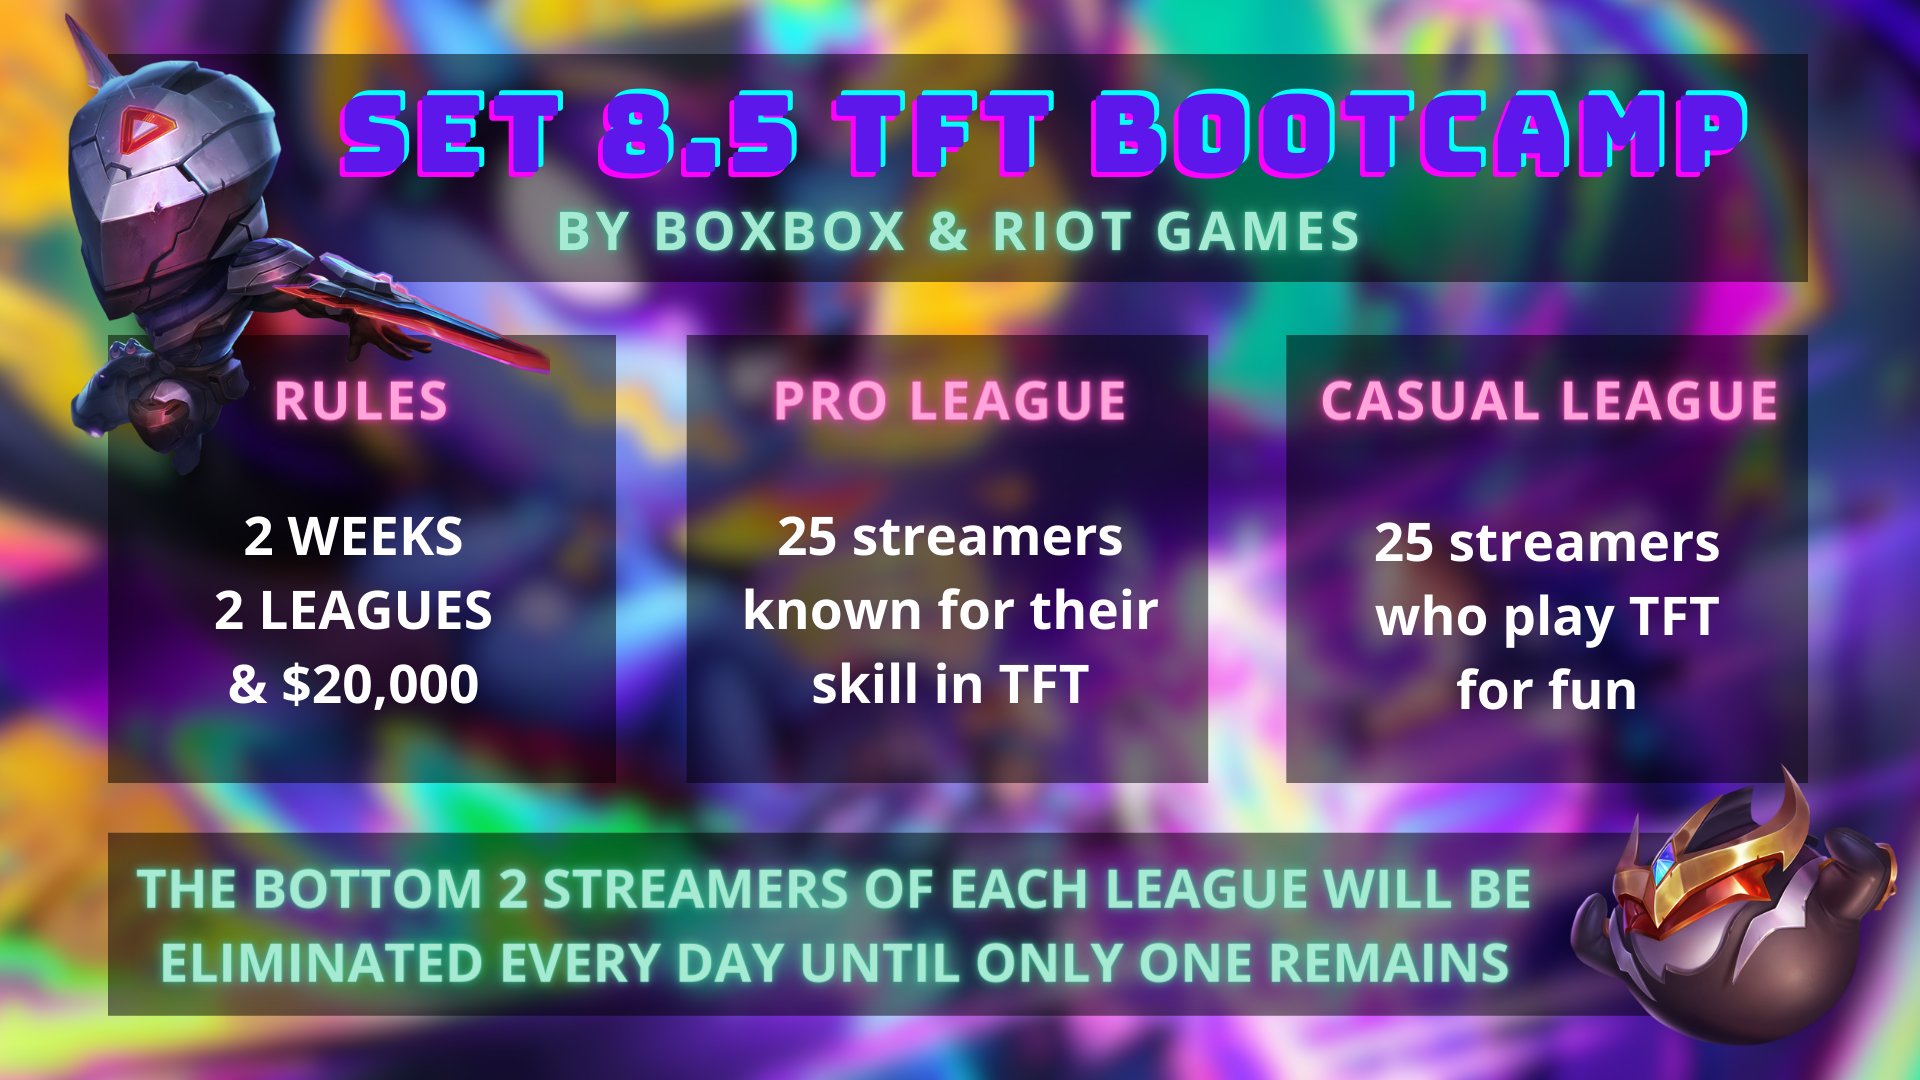 Boxbox Bootcamp returns for the release of Set 8.5!